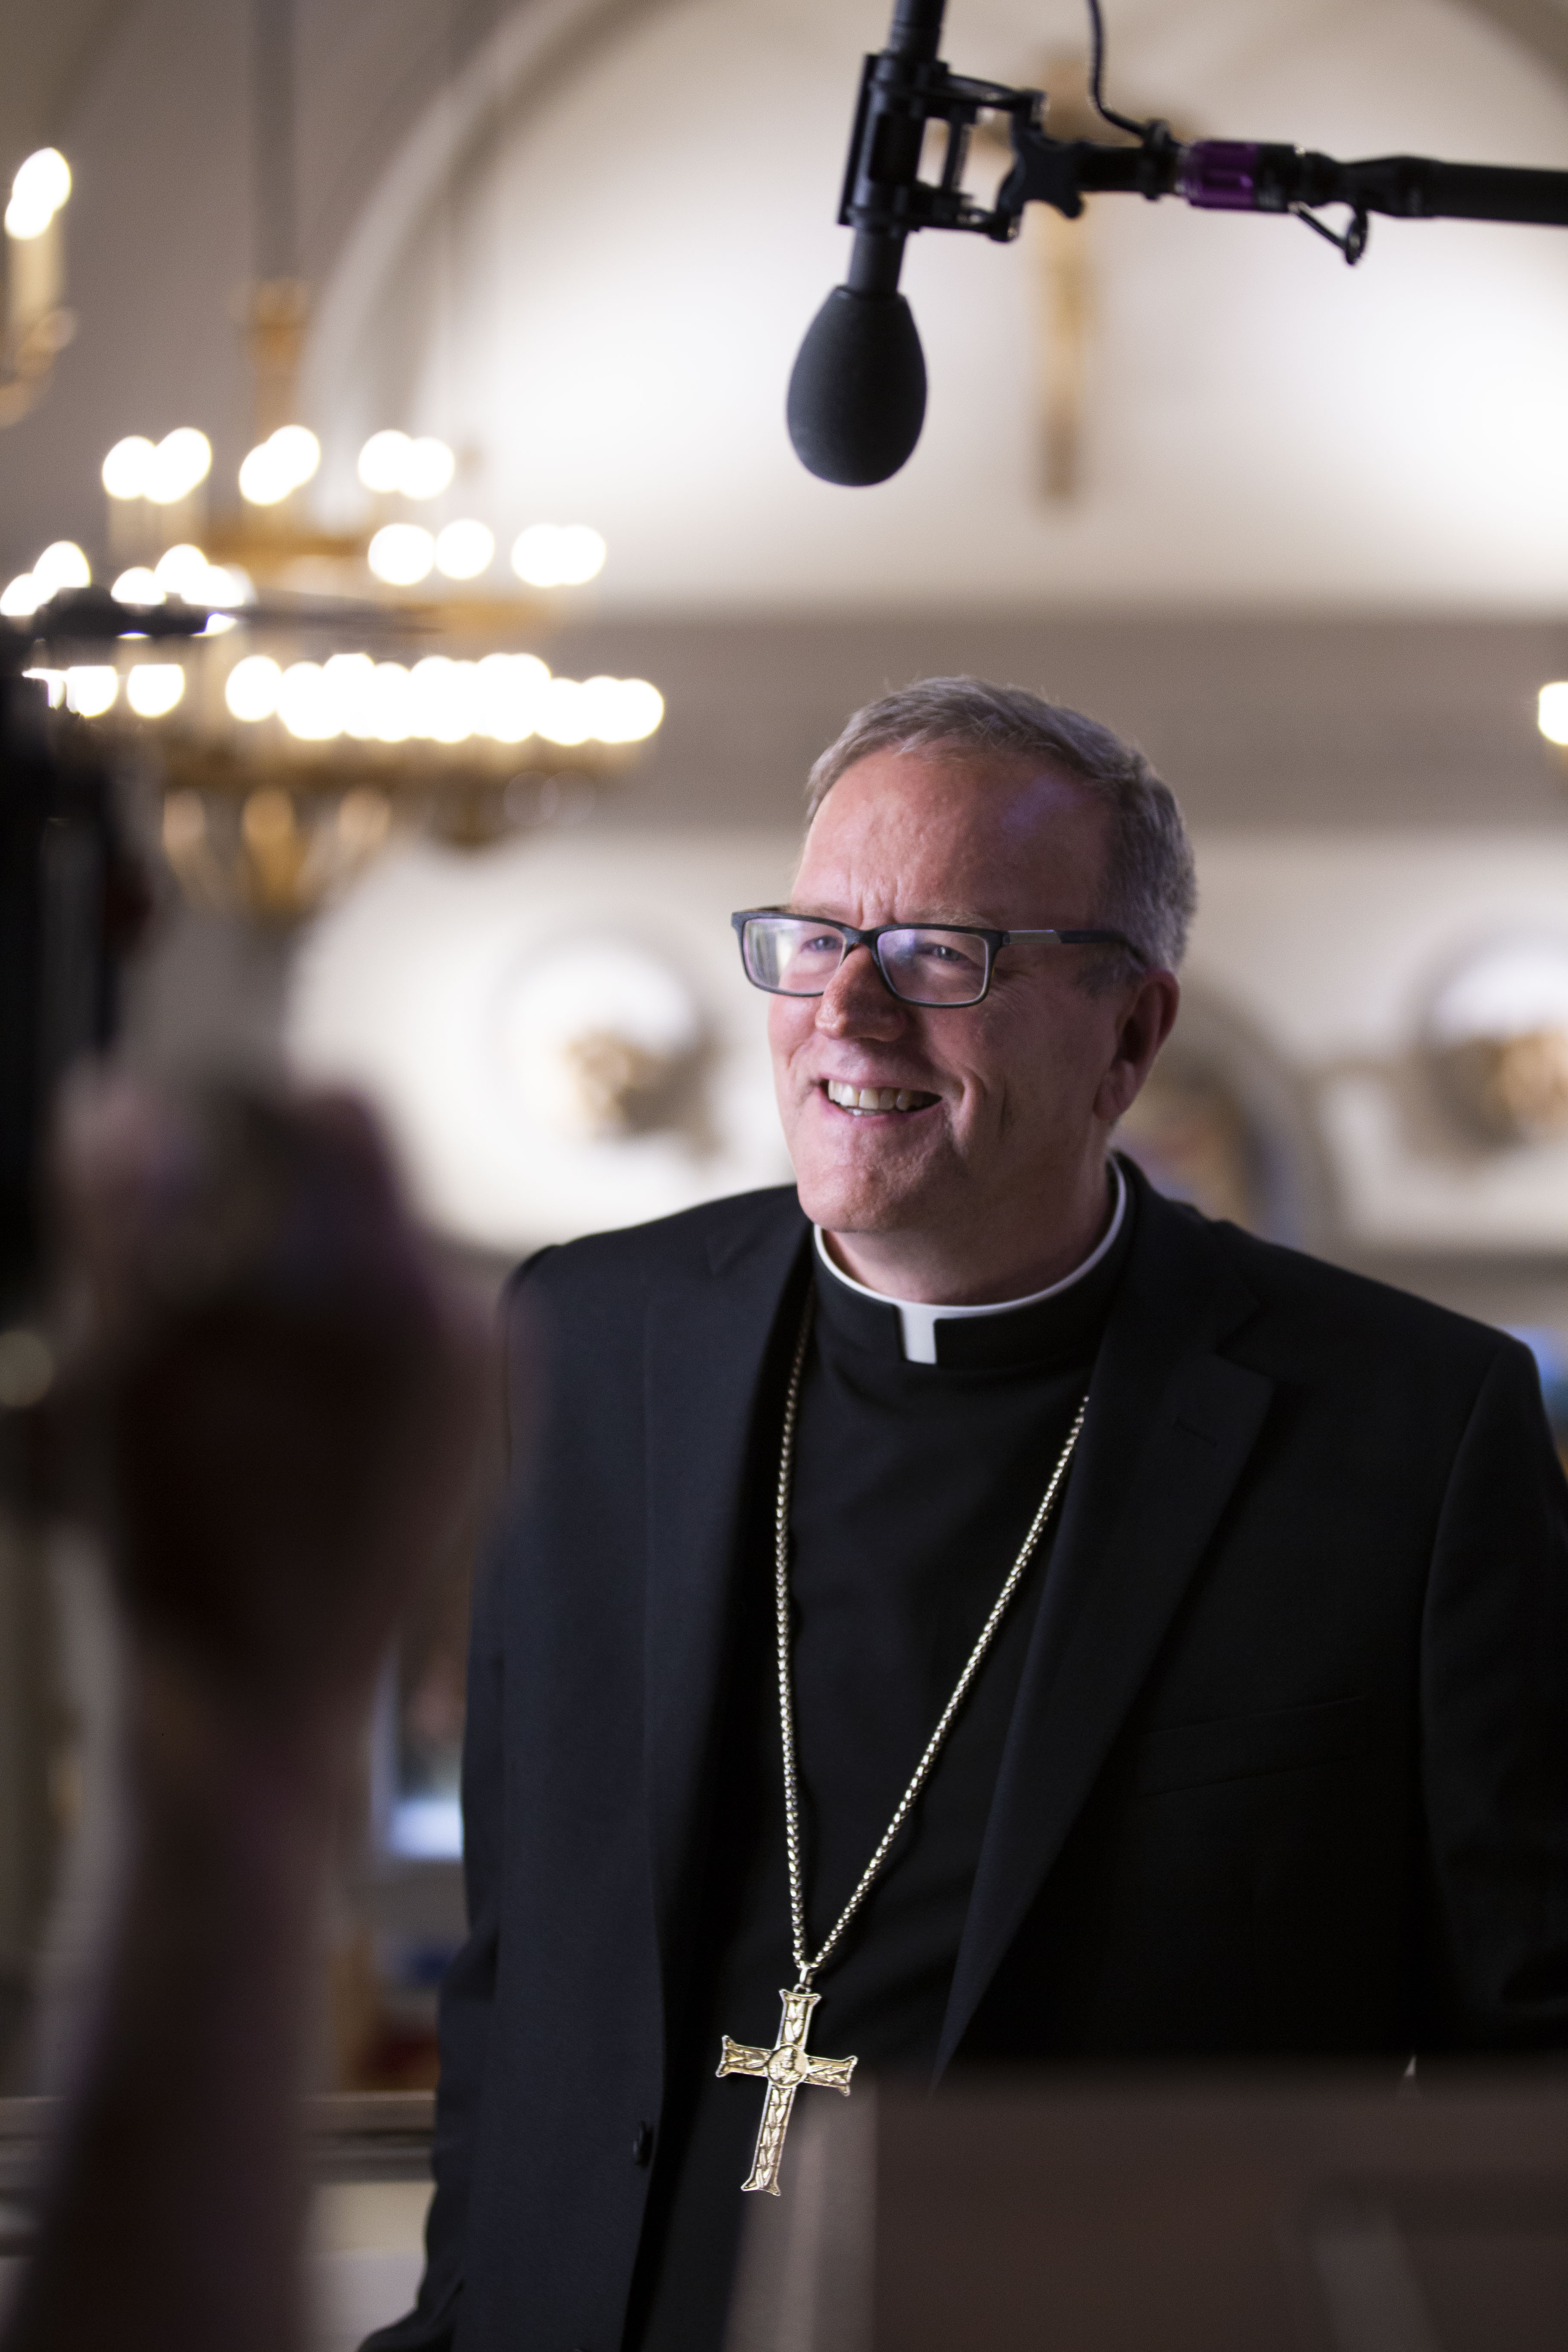 Bishop Barron with a microphone and smiling